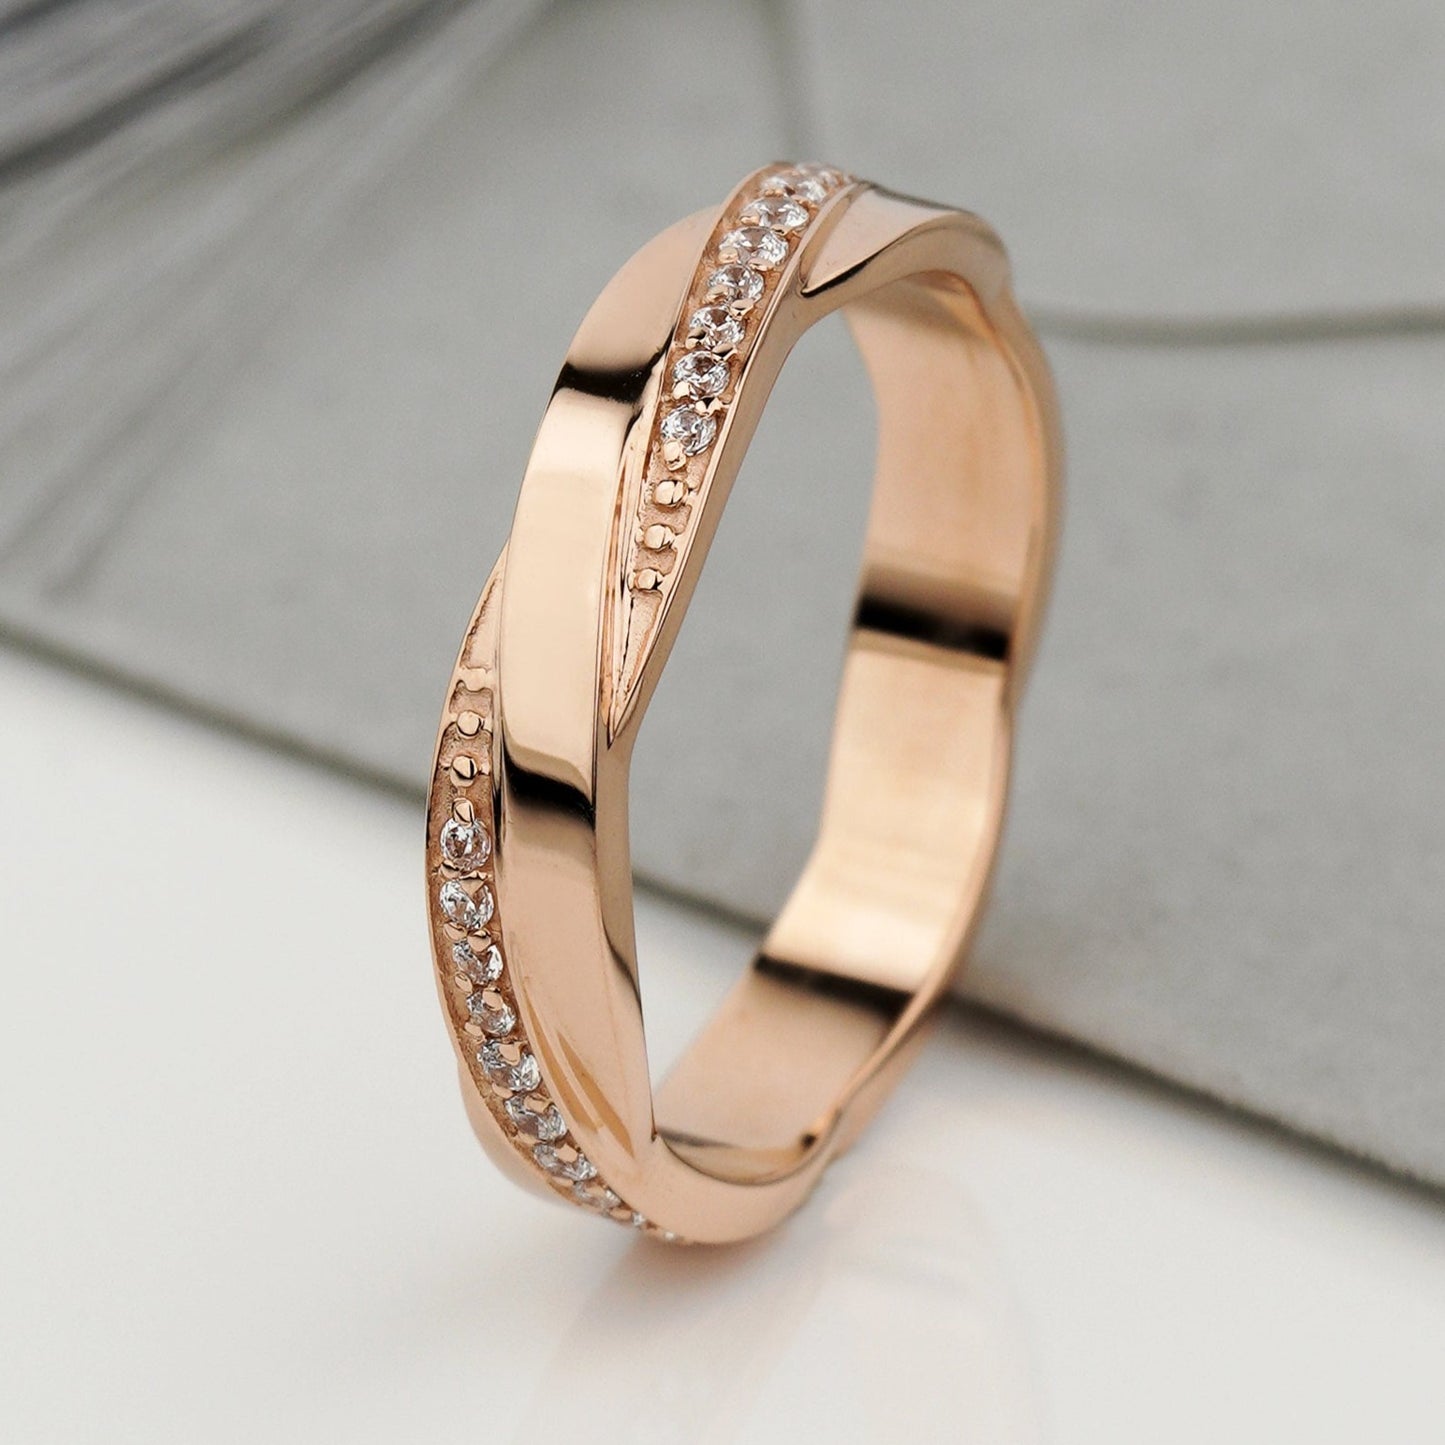 Women's wedding band with diamonds. Gold ring for women. Diamond wedding band women. Wedding bands female. Rose gold wedding band women. Unique gold ring. Twisted gold band